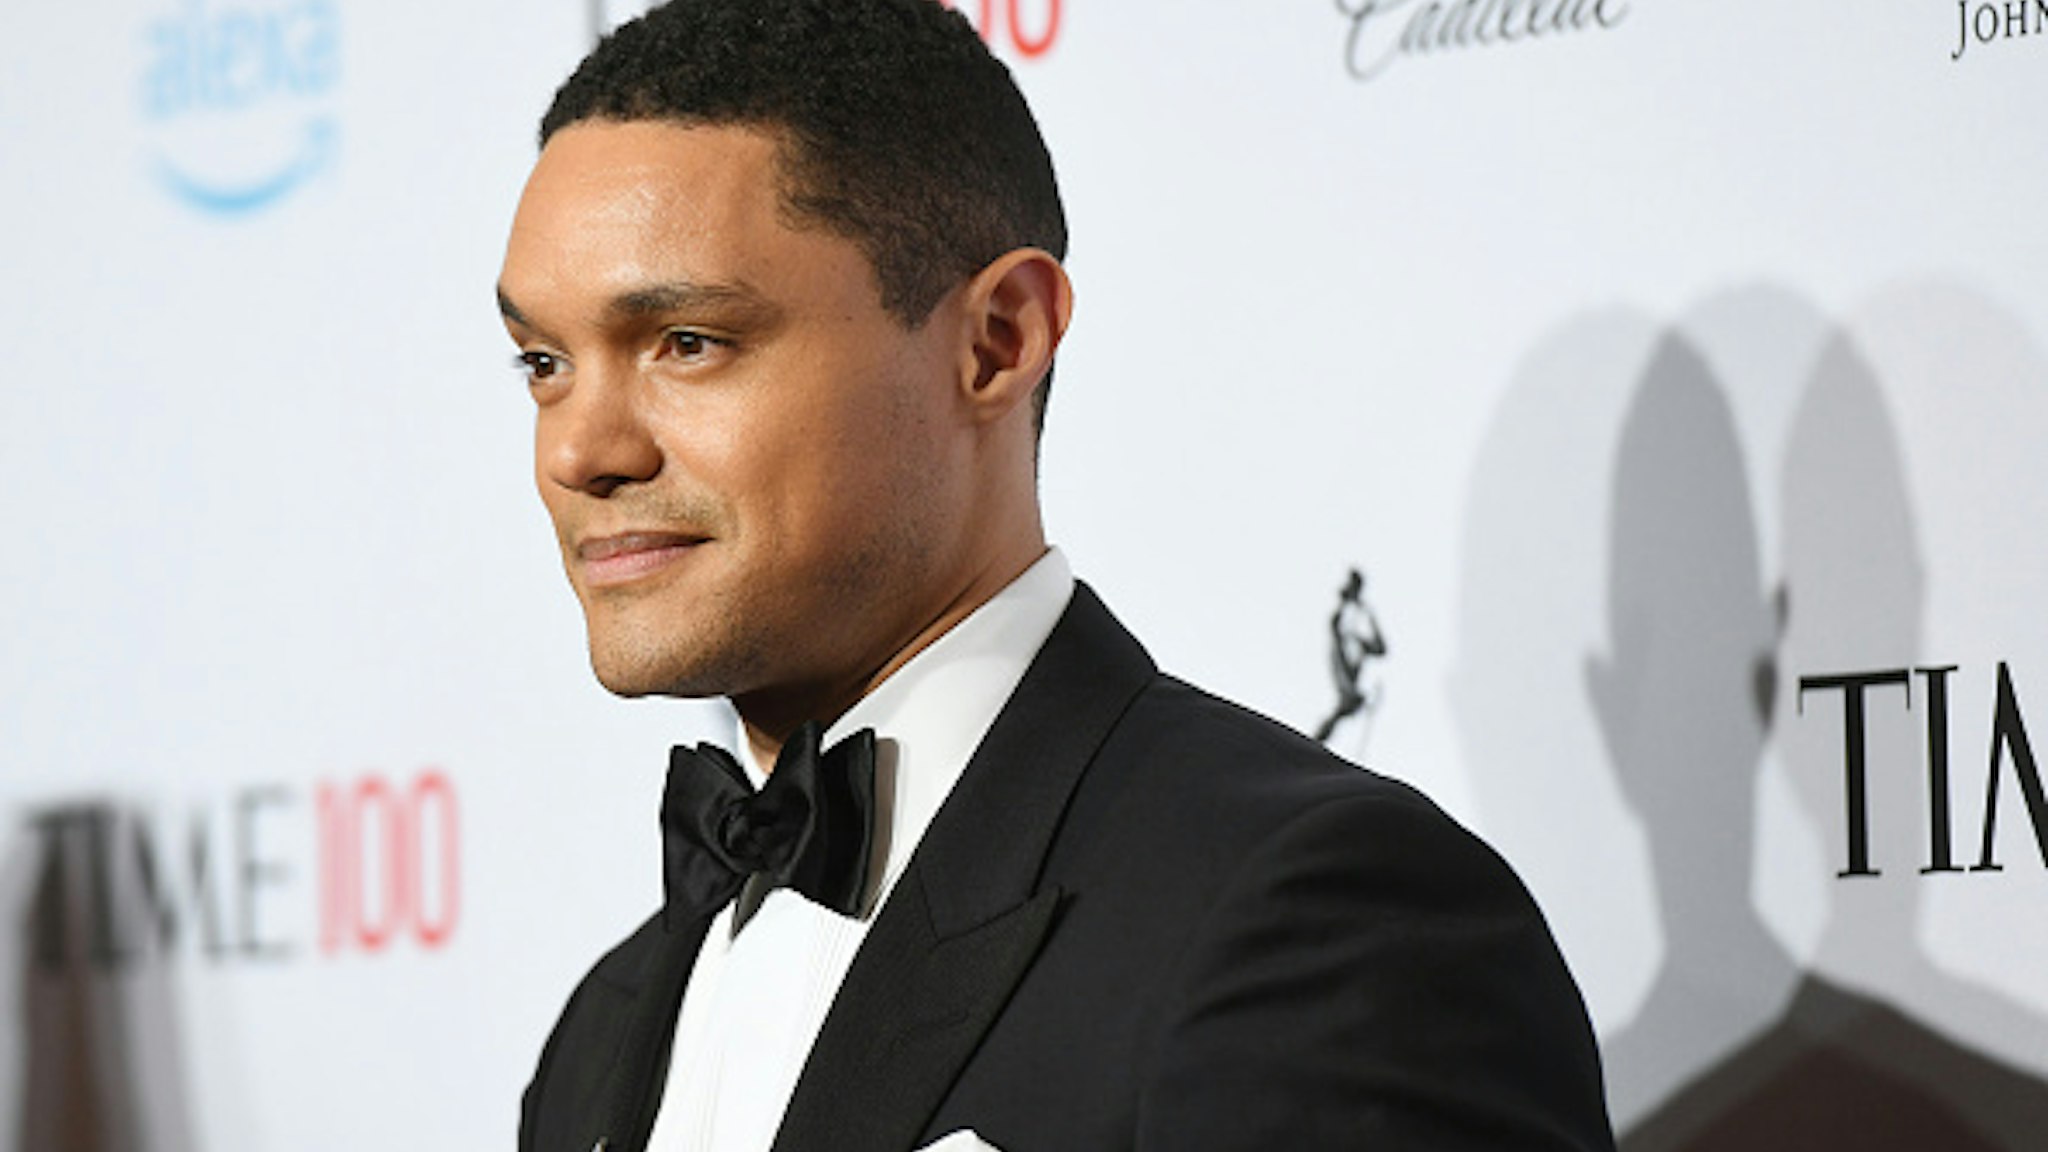 NEW YORK, NEW YORK - APRIL 23: Trevor Noah attends the TIME 100 Gala 2019 Lobby Arrivals at Jazz at Lincoln Center on April 23, 2019 in New York City.